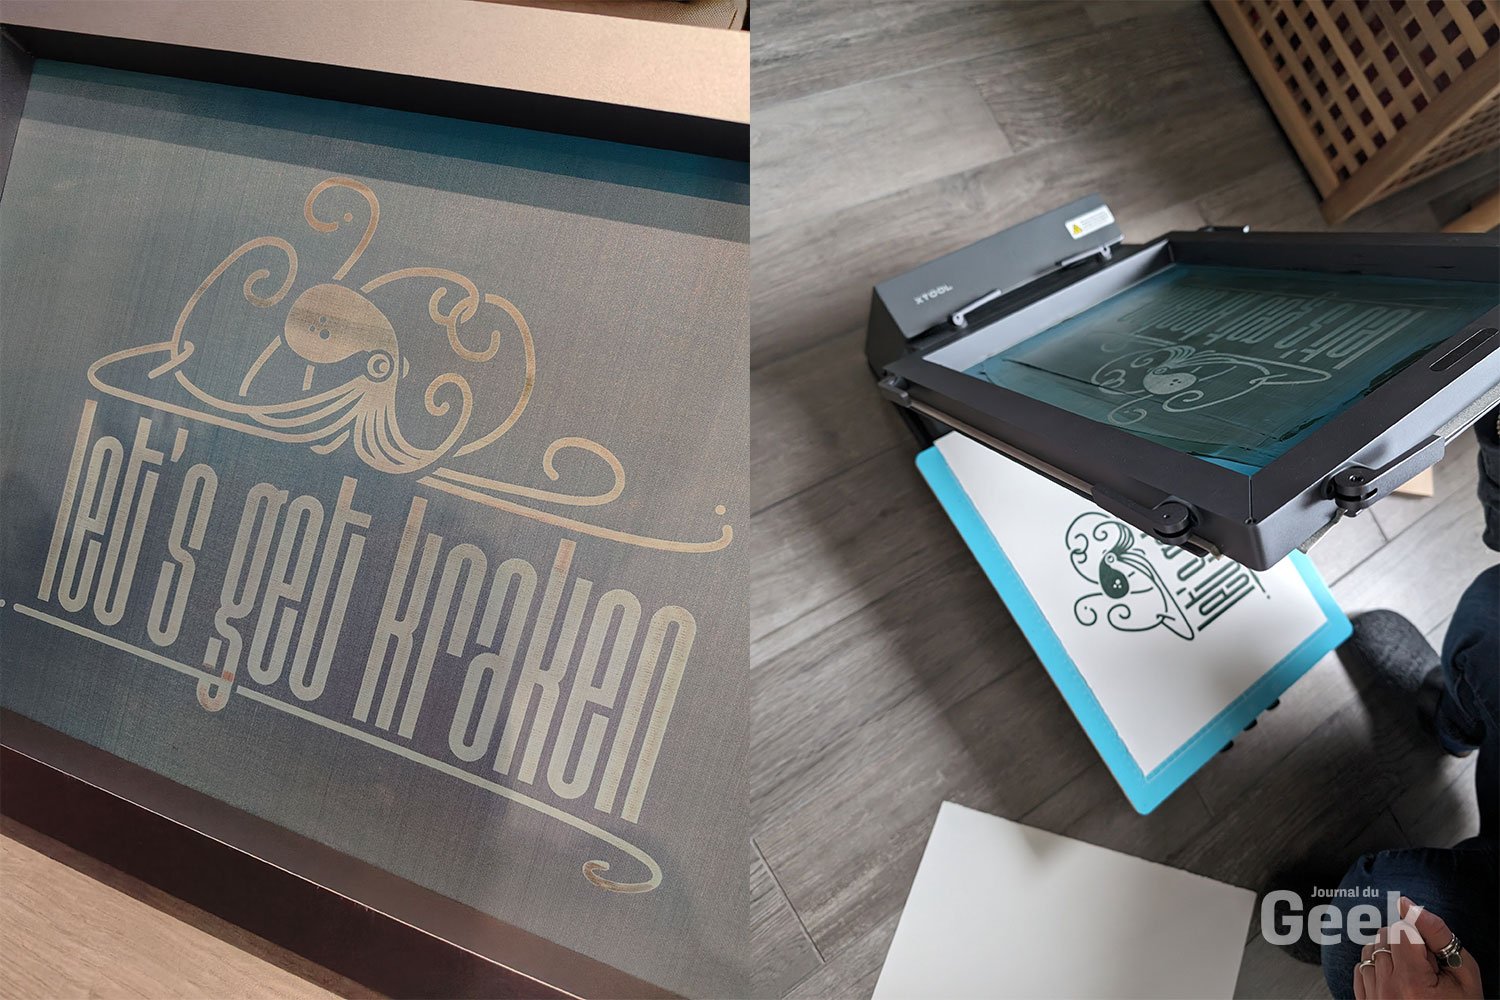 Screen printing has never been easier at home